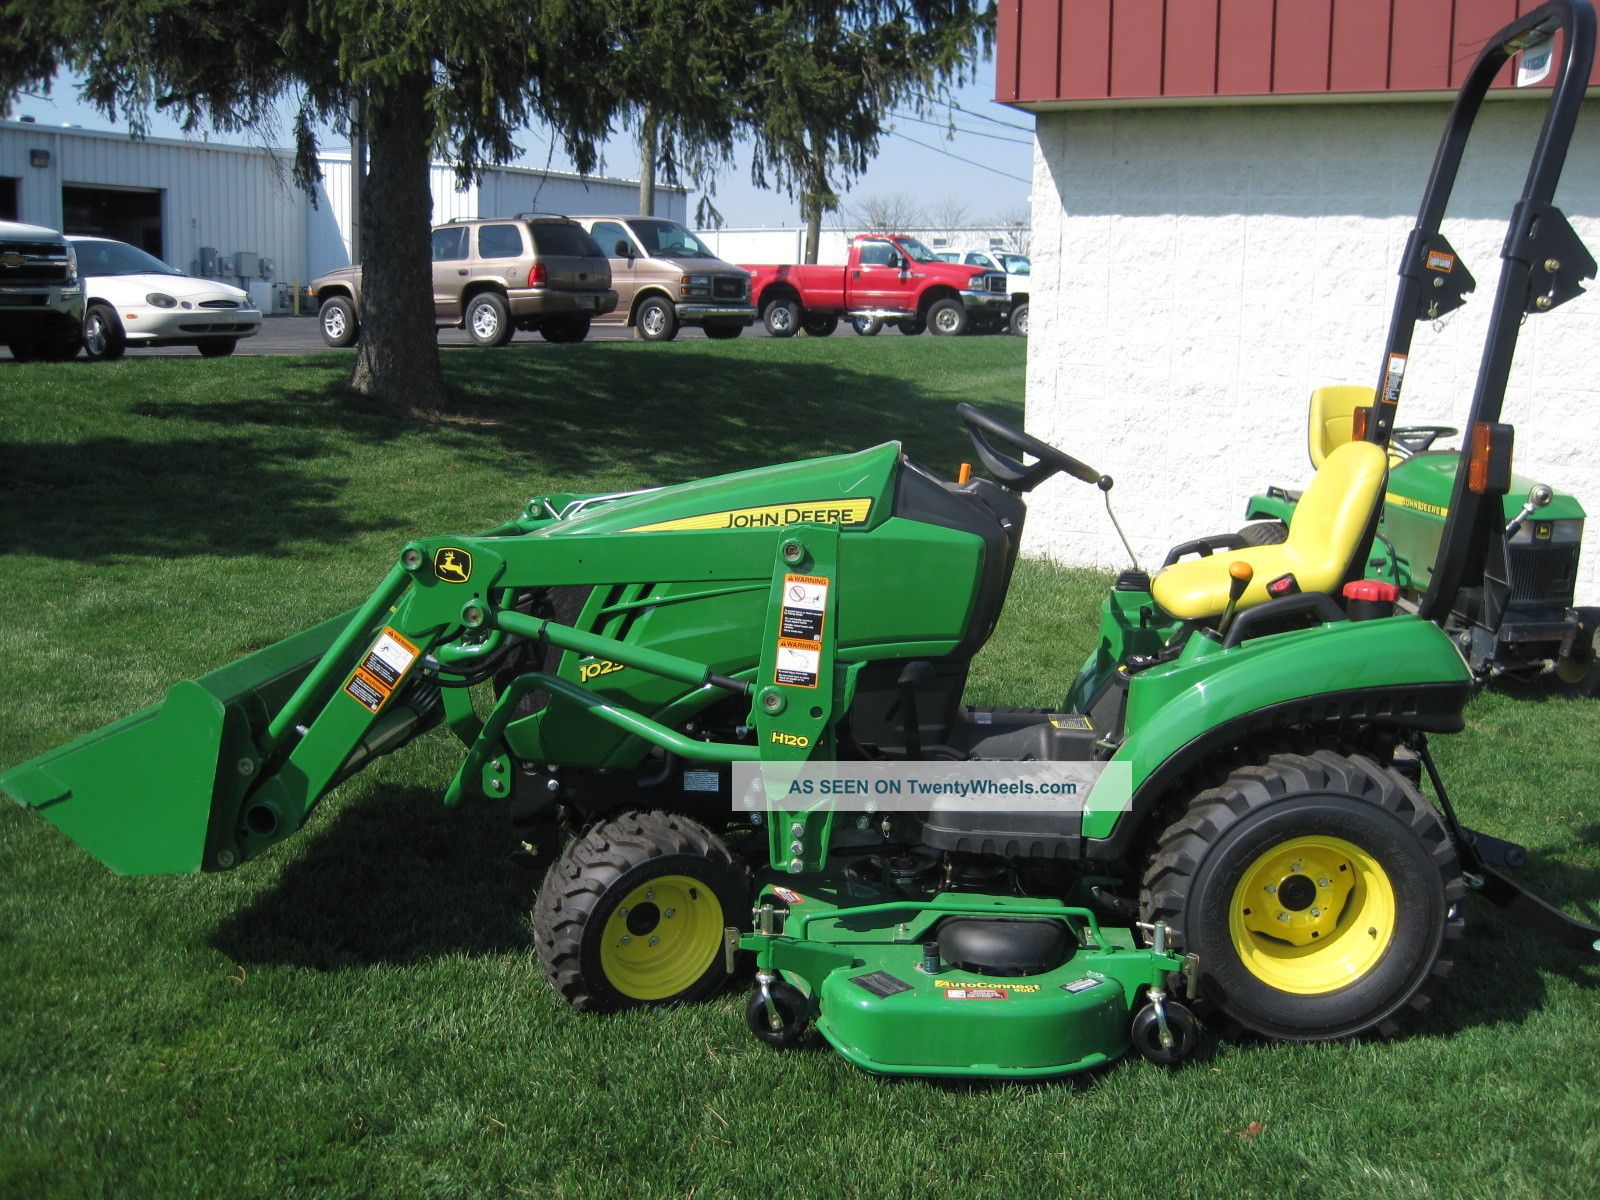 New John Deere 1023e 1 Series Sub Compact Tractor With ...